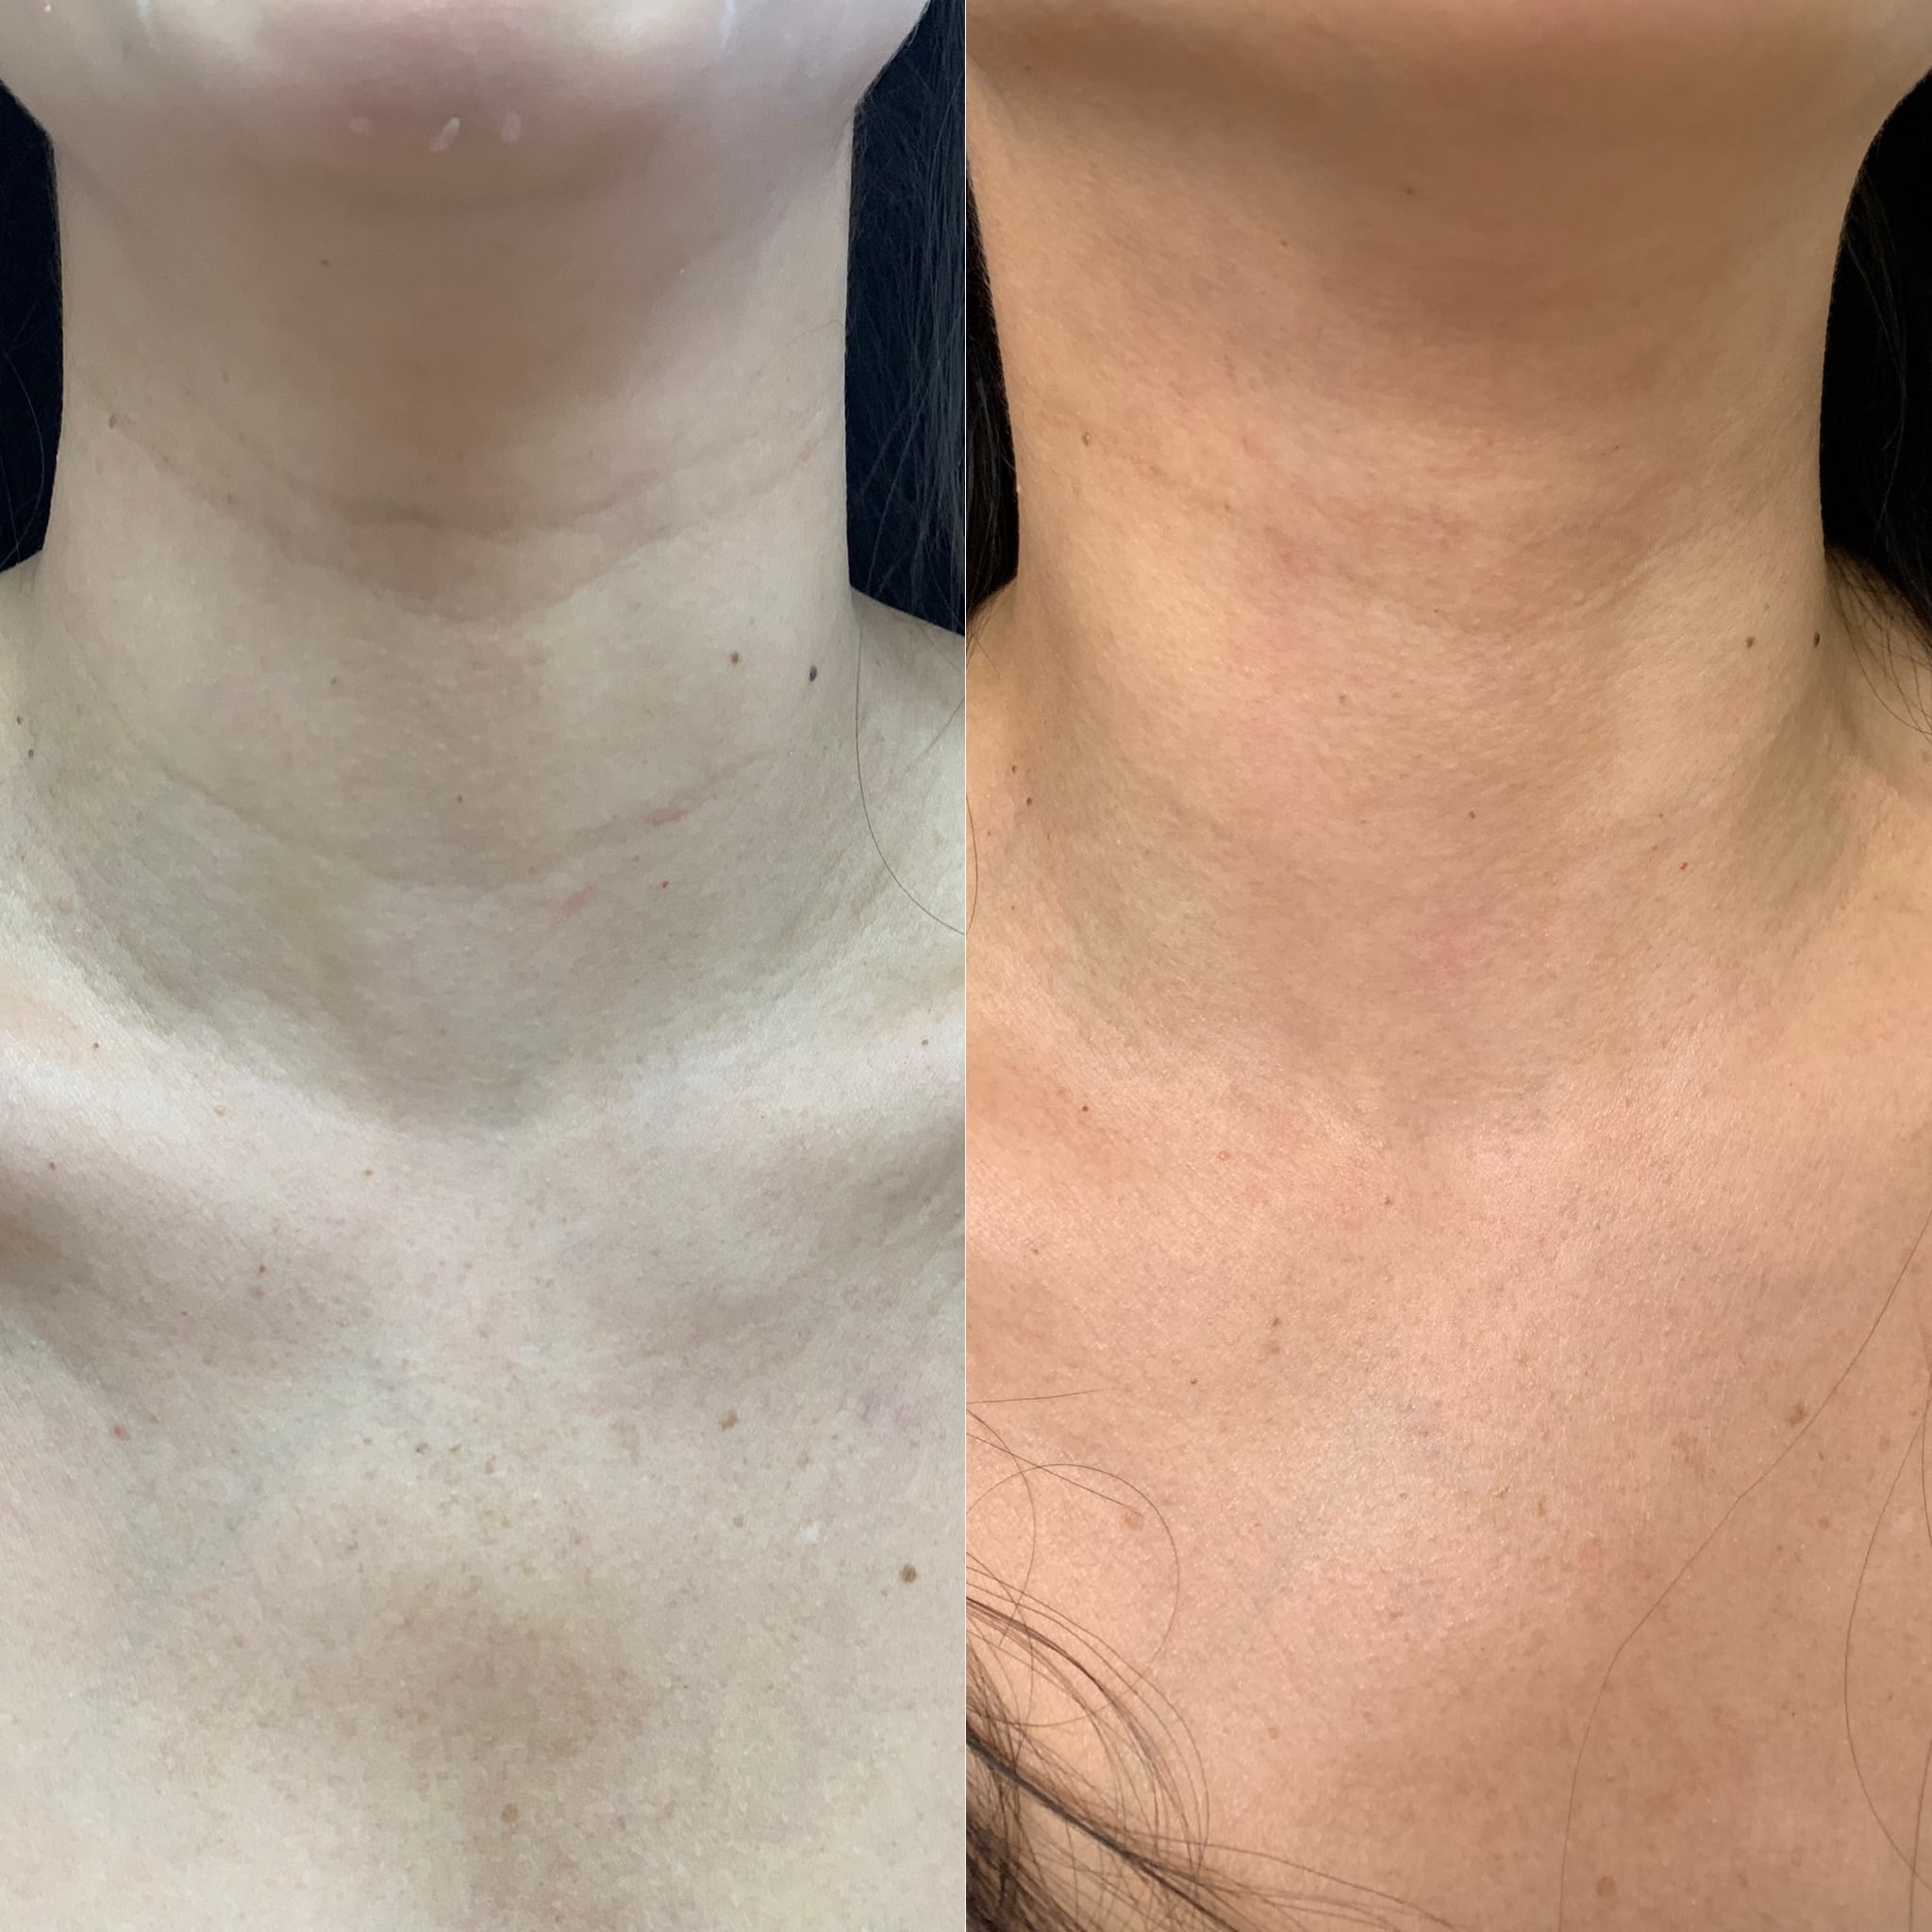 Before and After Fillers Neck Lines treatment | Beauty Boost Med Spa at Newport Beach, CA